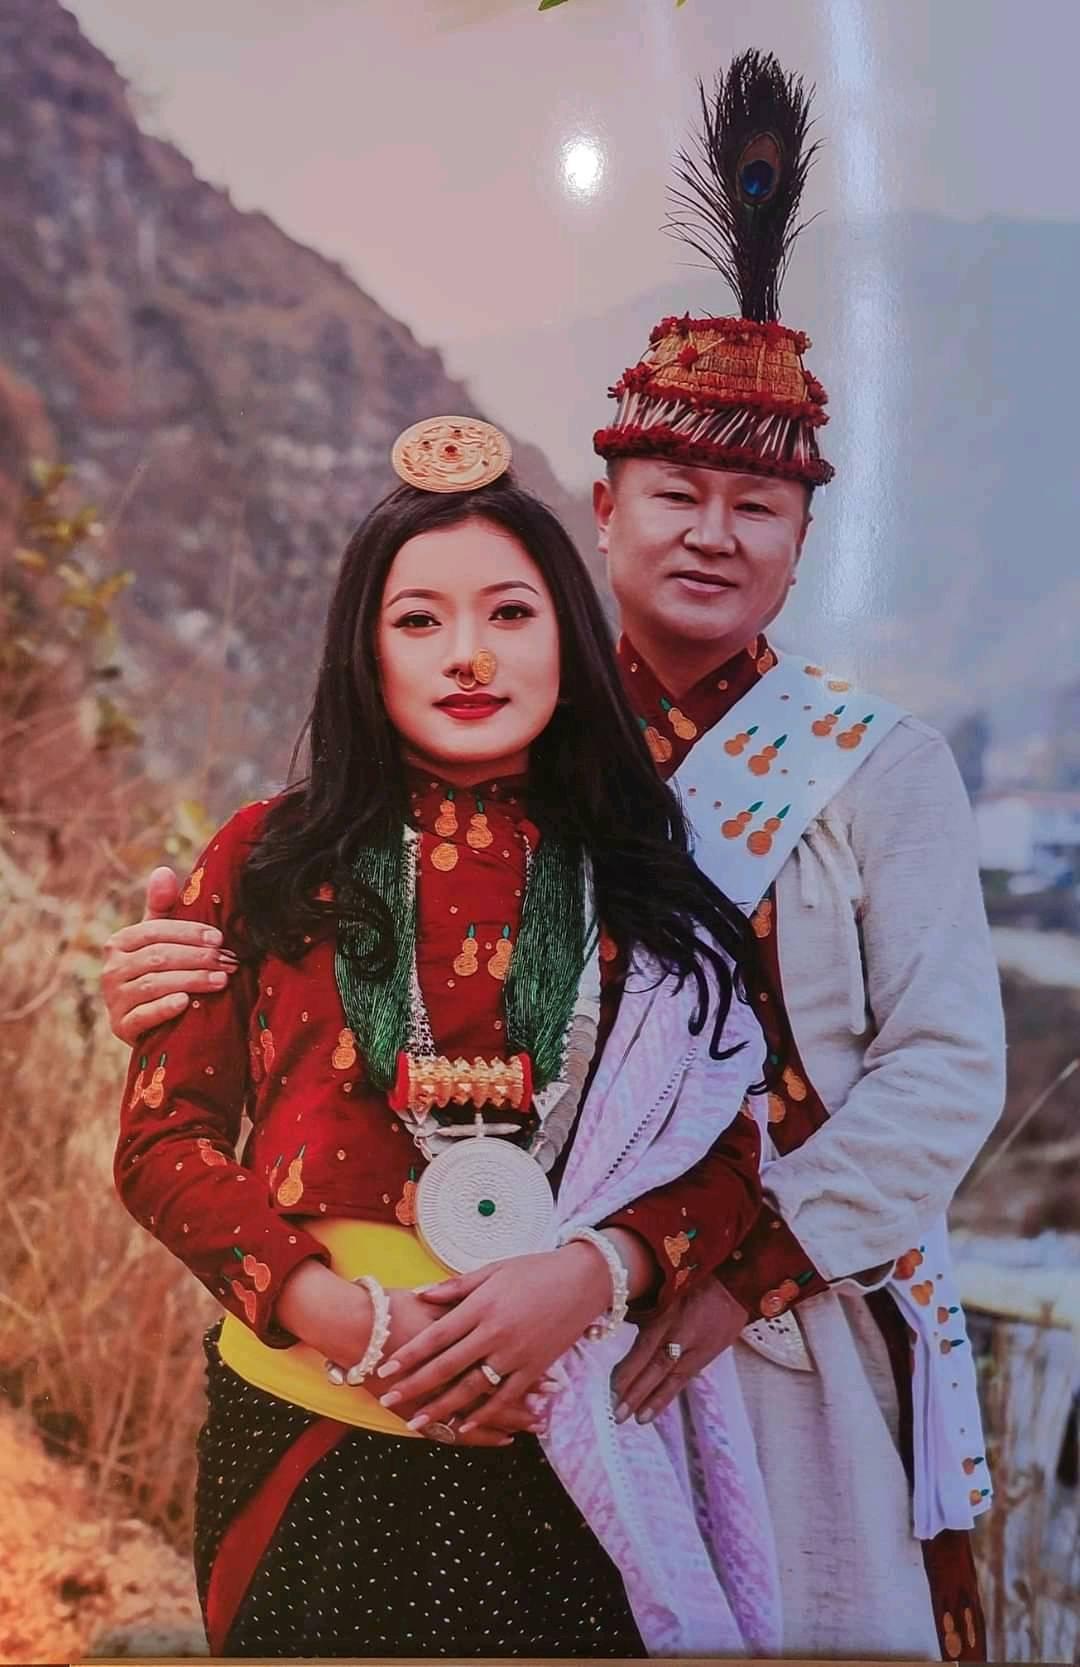 Chief Minister of Province 1 Sherdhan Rai ties knot with Jangmu Sherpa